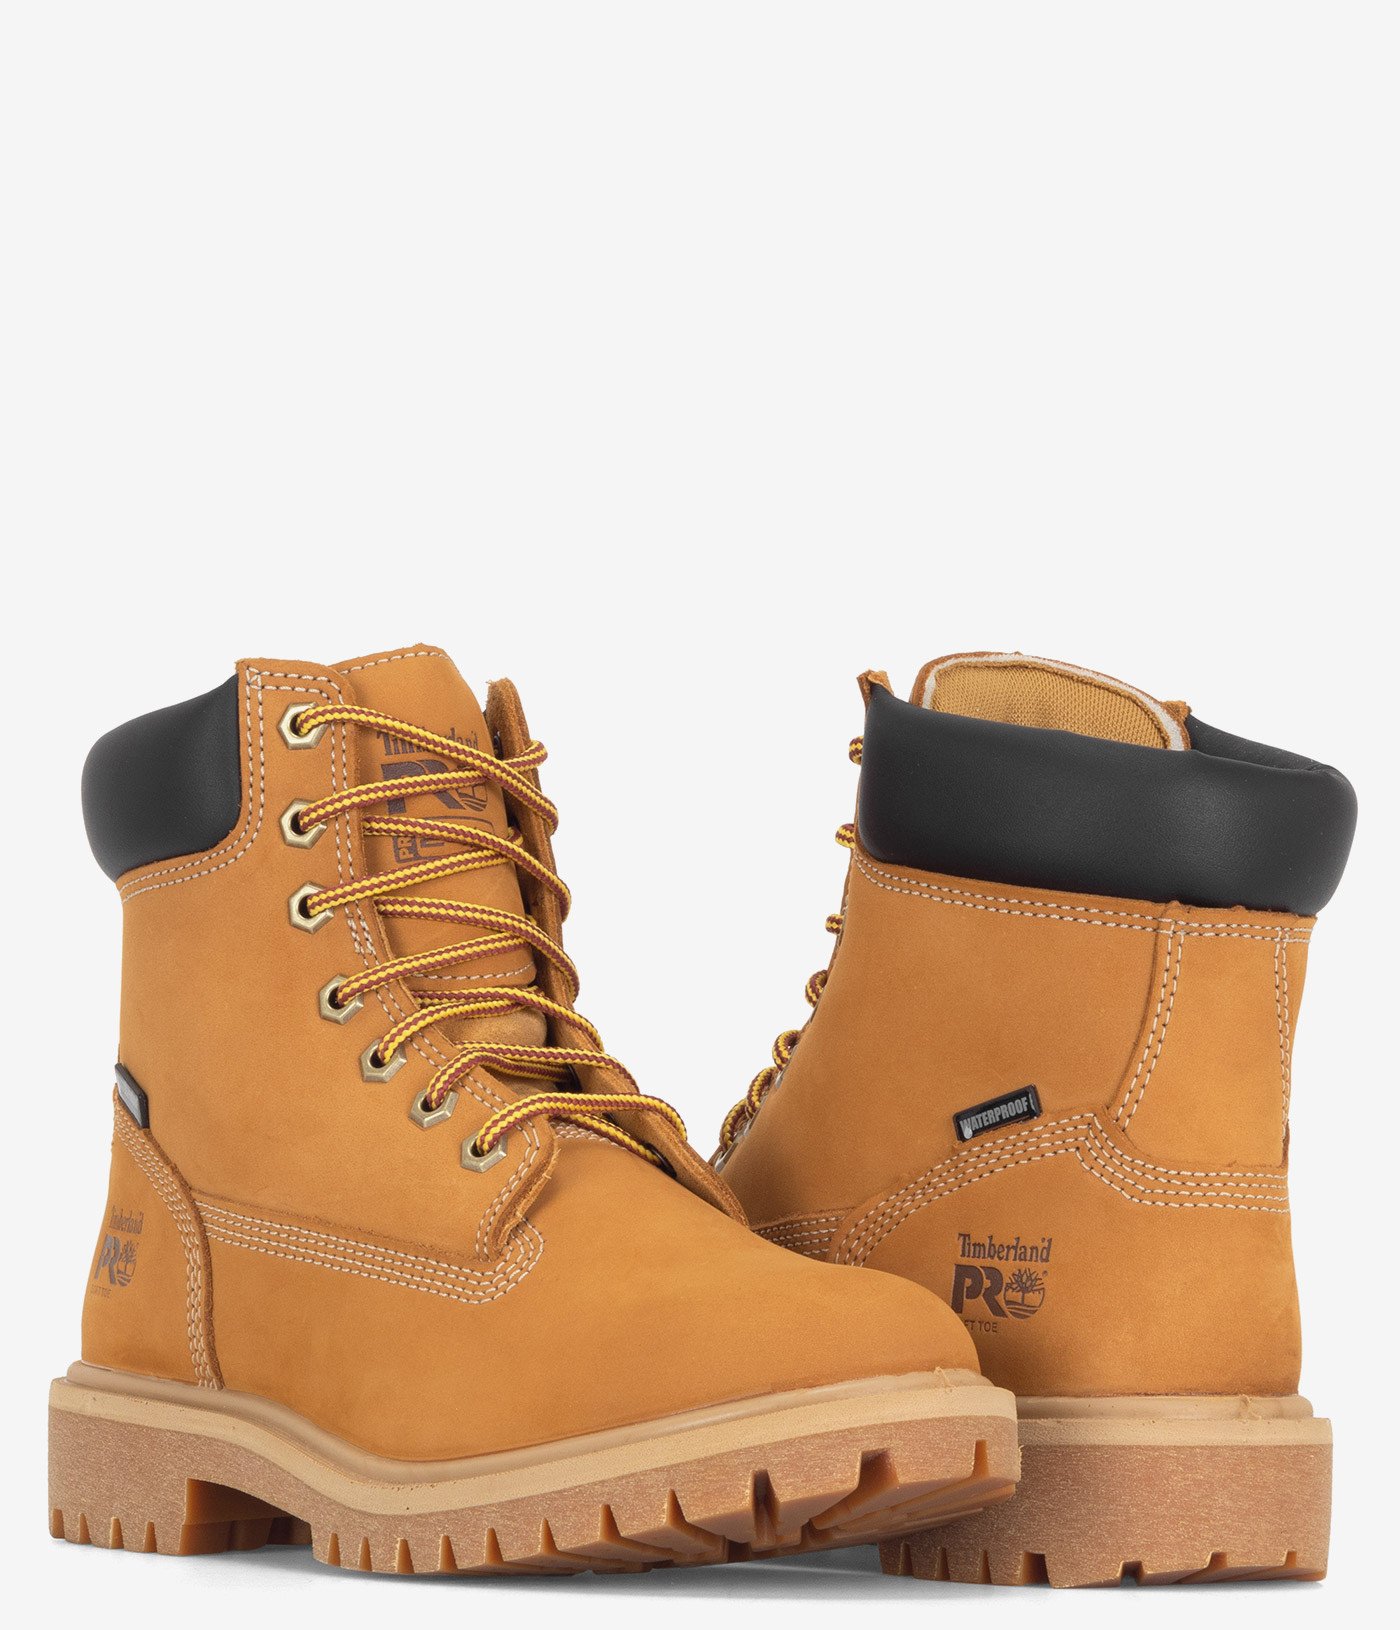 Timberland PRO Direct Attach 6” Waterproof Soft Toe EH Boot